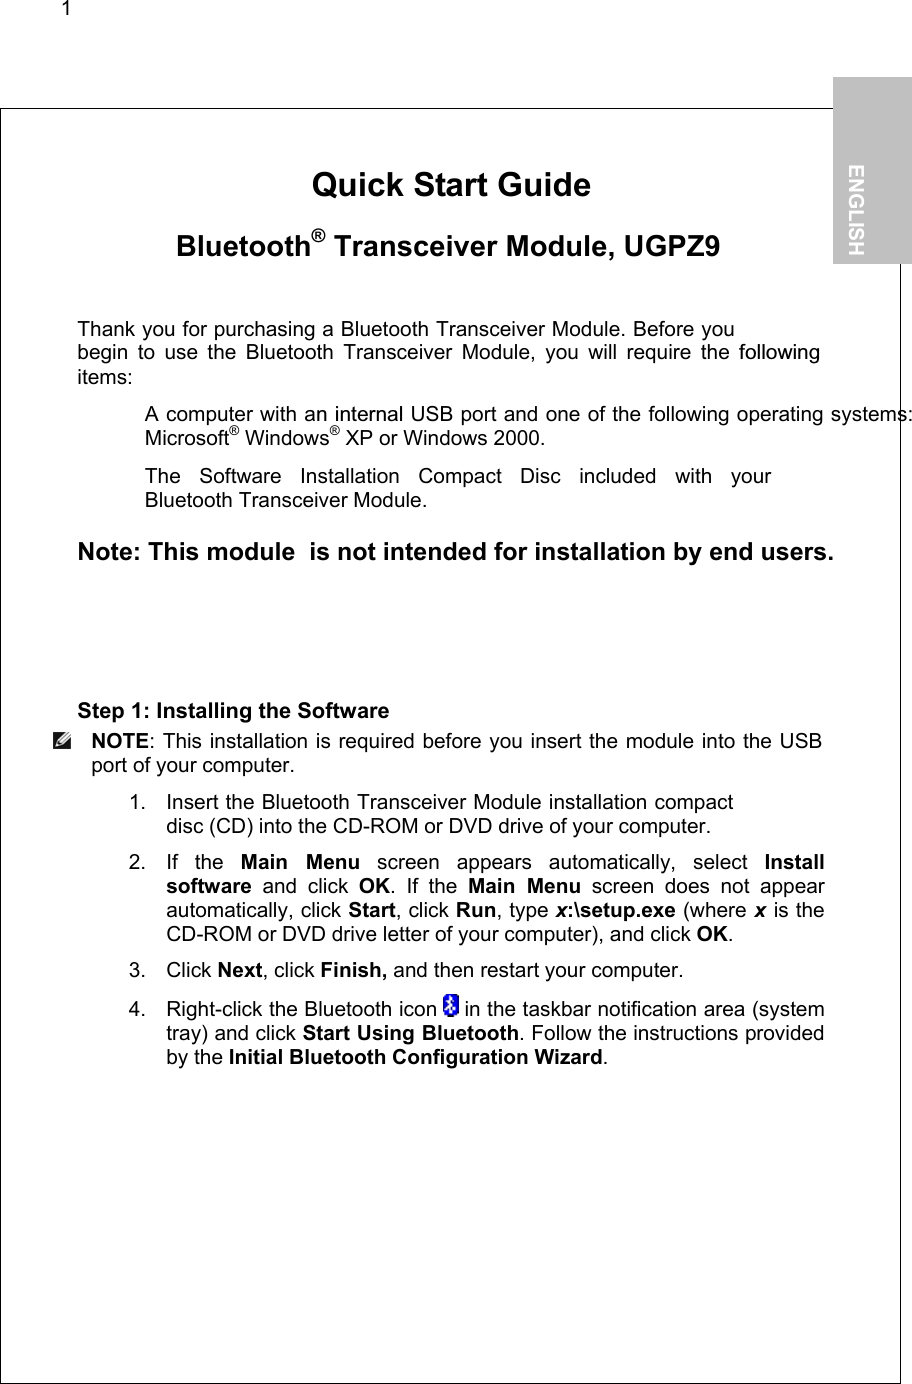 1        Quick Start Guide   Bluetooth® Transceiver Module, UGPZ9  Thank you for purchasing a Bluetooth Transceiver Module. Before you begin to use the Bluetooth Transceiver Module, you will require the followingitems:   A computer with an internal USB port and one of the following operating systems: Microsoft® Windows® XP or Windows 2000.   The Software Installation Compact Disc included with your  Bluetooth Transceiver Module.  Note: This module  is not intended for installation by end users.  Step 1: Installing the Software  NOTE: This installation is required before you insert the module into the USB port of your computer. 1. Insert the Bluetooth Transceiver Module installation compact disc (CD) into the CD-ROM or DVD drive of your computer. 2. If the Main Menu screen appears automatically, select Install software and click OK. If the Main Menu screen does not appear automatically, click Start, click Run, type x:\setup.exe (where x is the CD-ROM or DVD drive letter of your computer), and click OK. 3. Click Next, click Finish, and then restart your computer. 4.  Right-click the Bluetooth icon   in the taskbar notification area (system tray) and click Start Using Bluetooth. Follow the instructions provided by the Initial Bluetooth Configuration Wizard.   1.           ENGLISH  